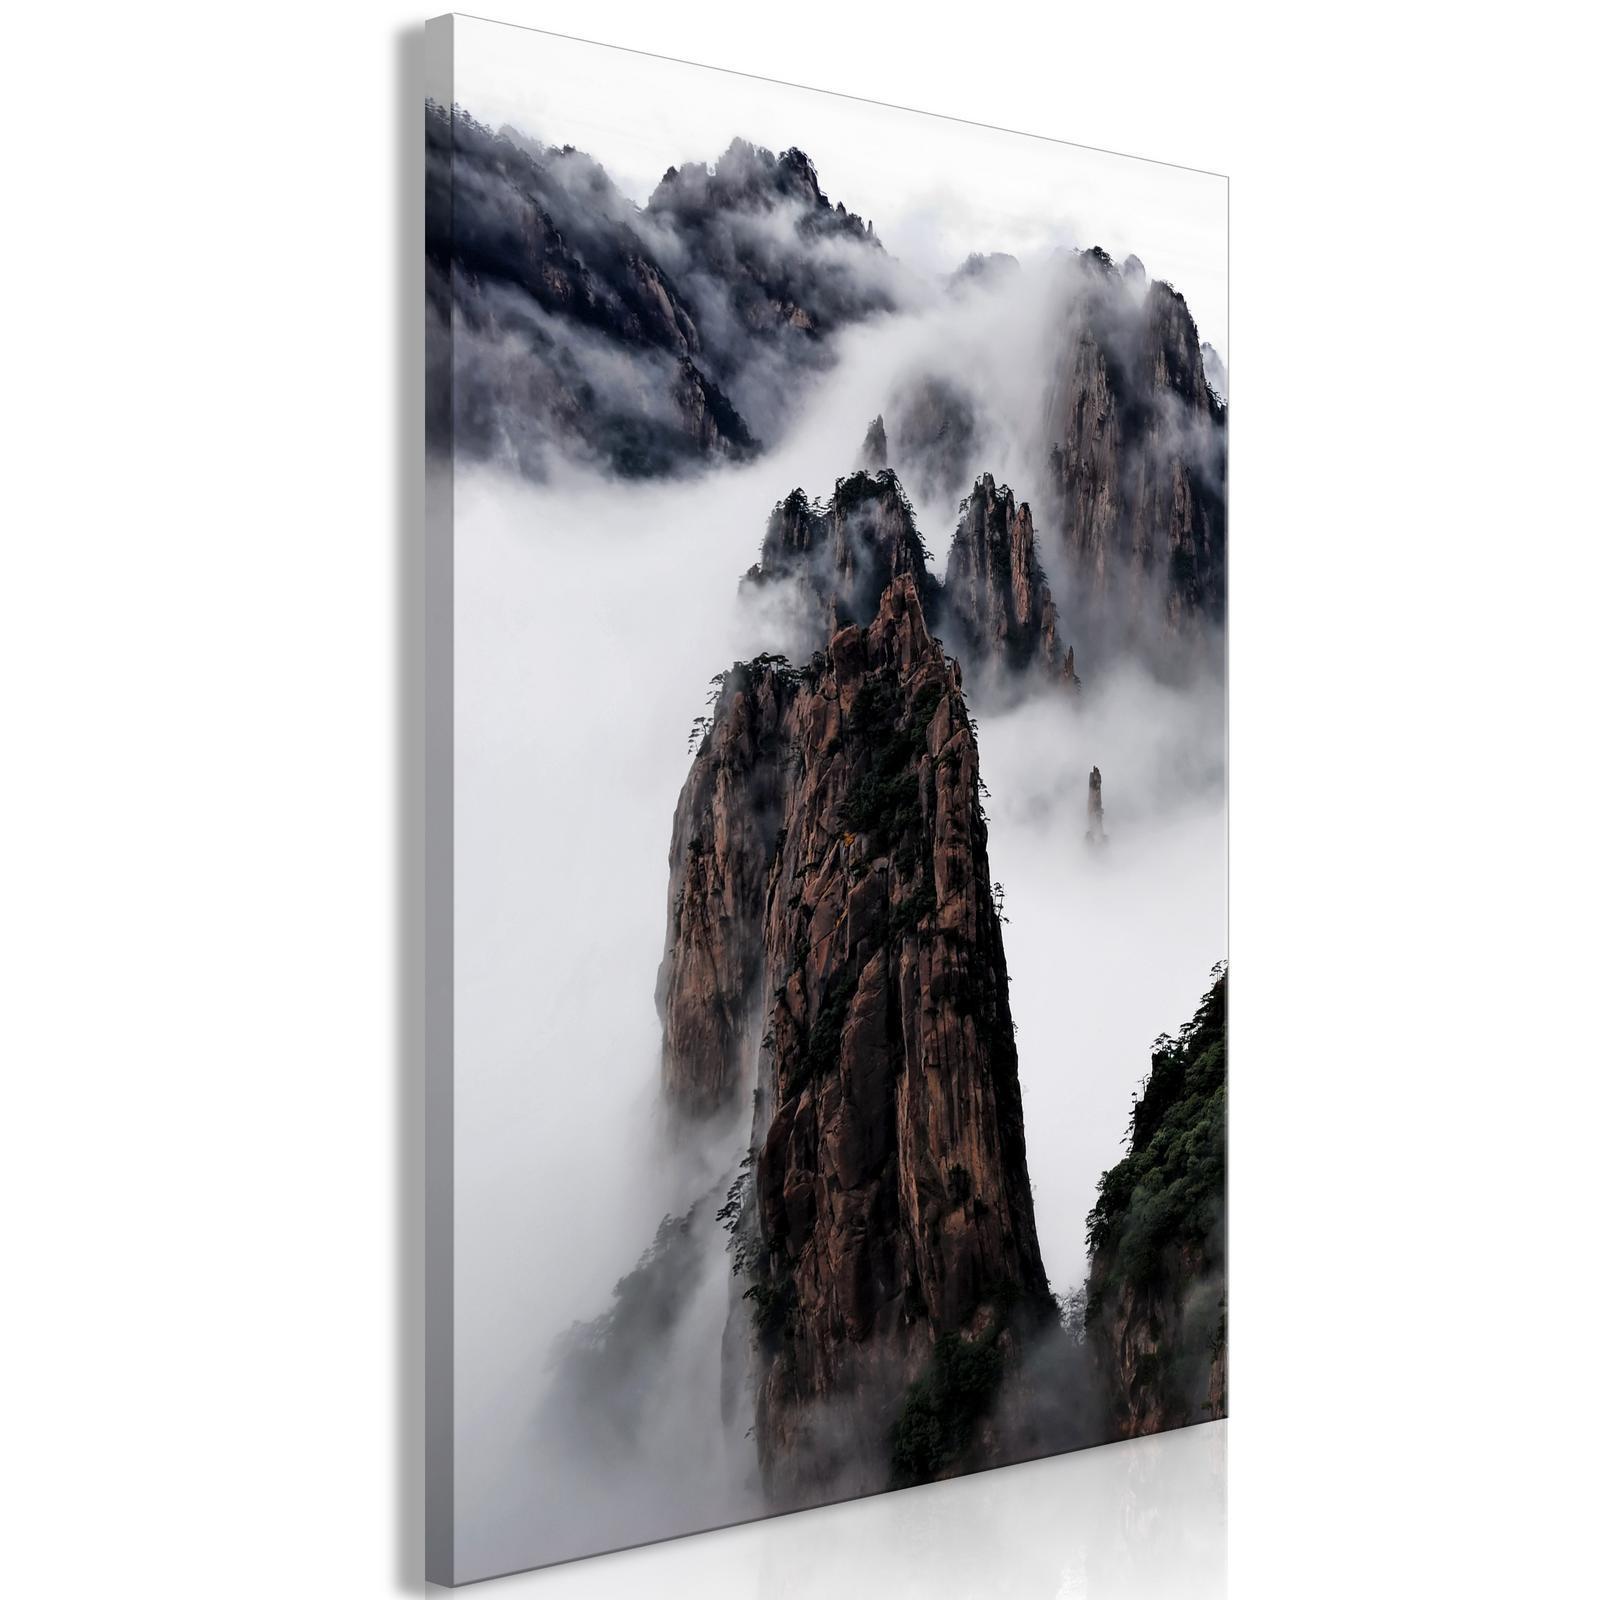 Tableau - High Mountains in Mist (1-part) - Landscape of Clouds Amid Rocks